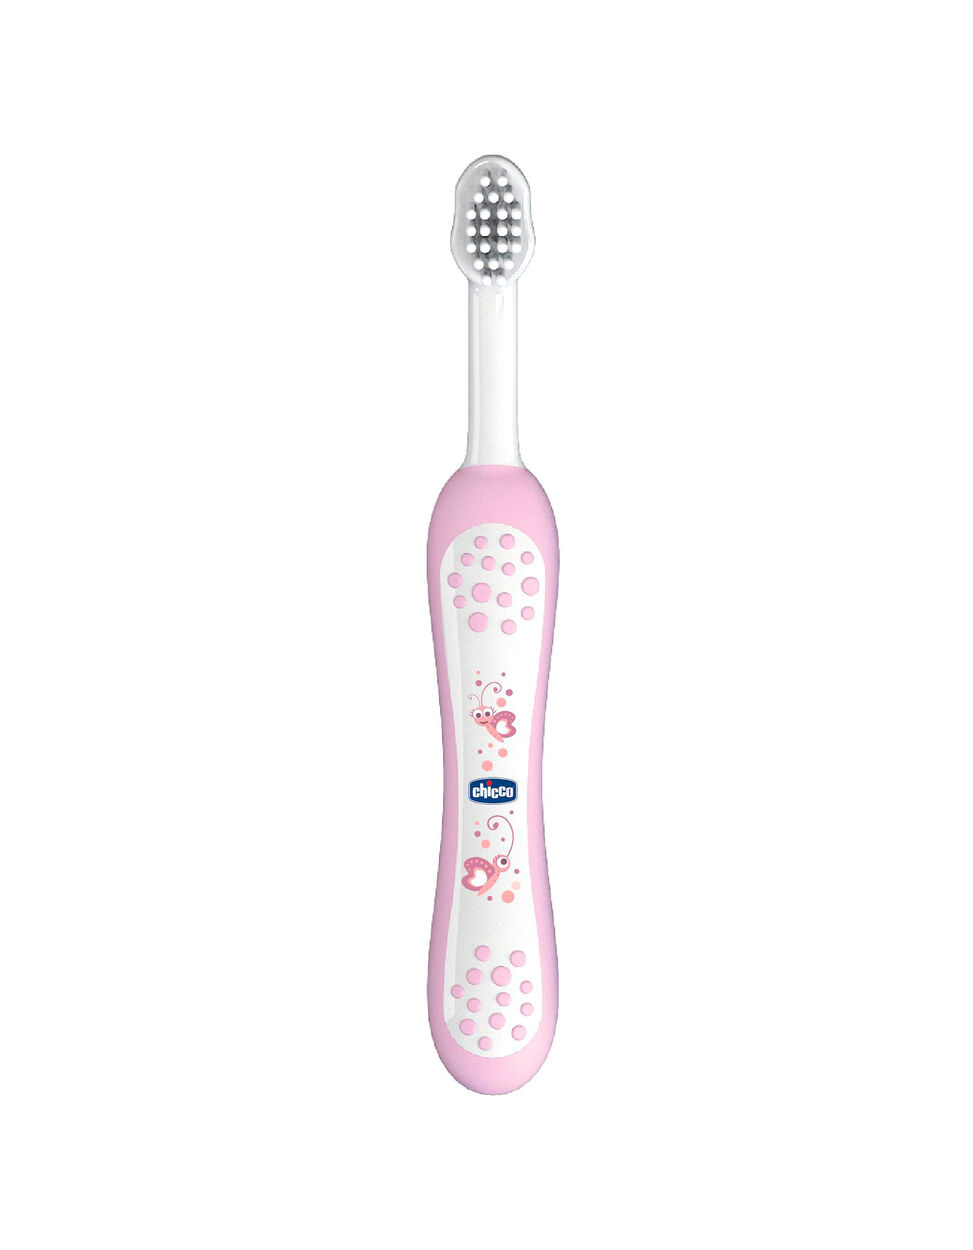 Toothbrush by Chicco